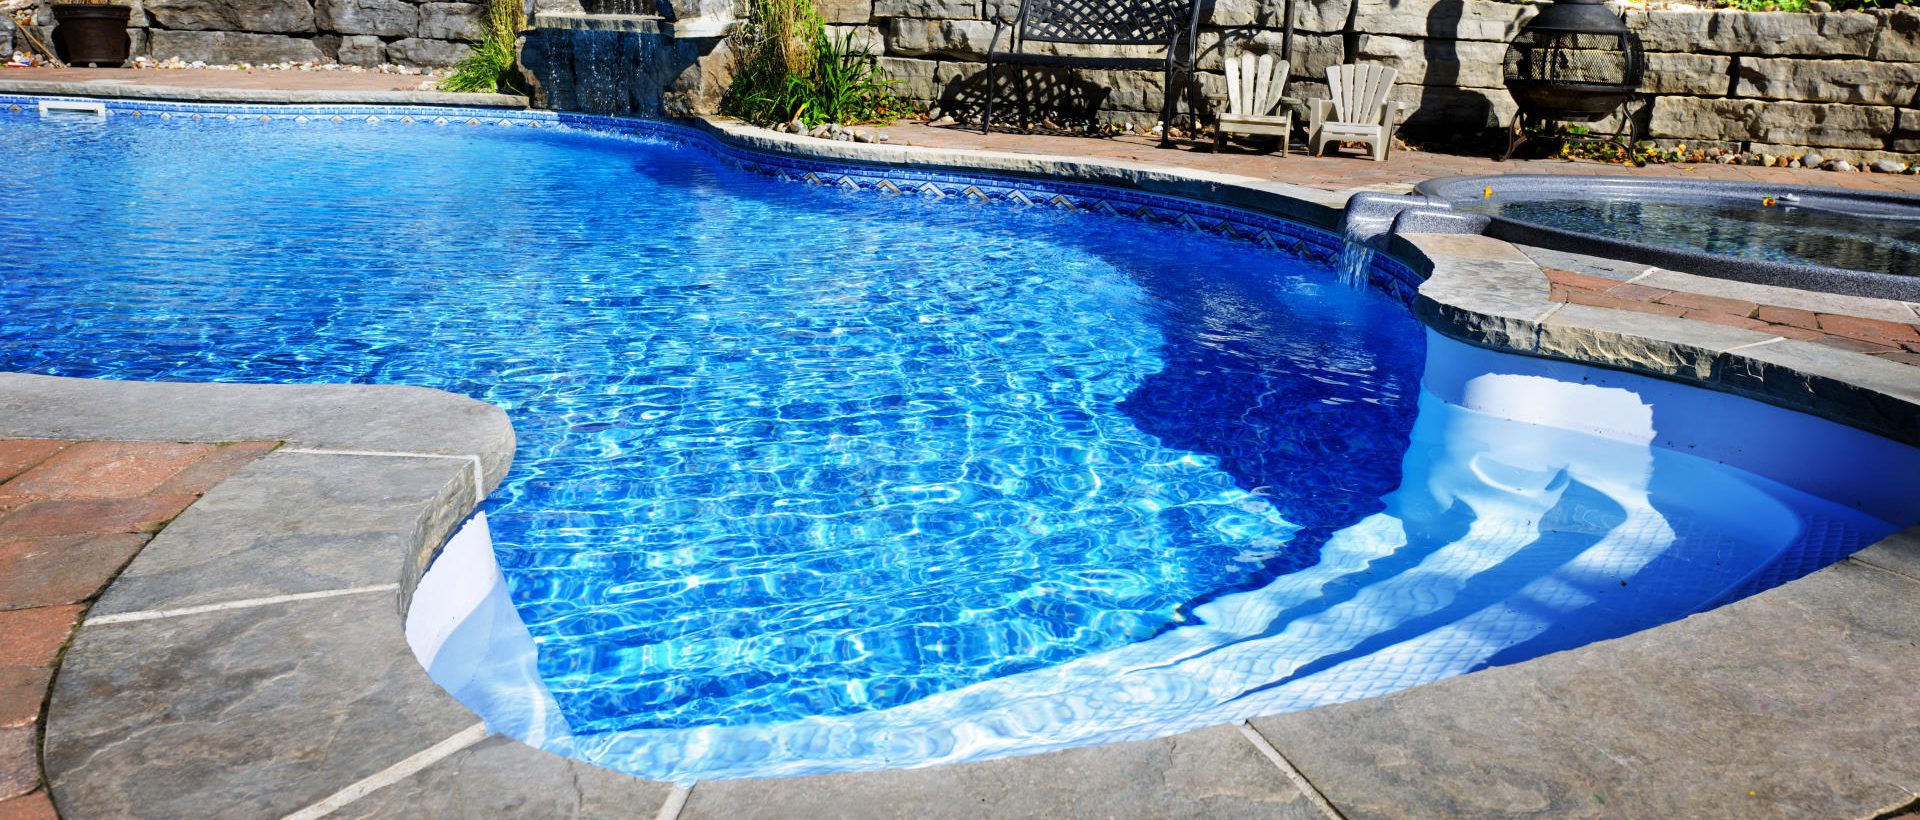 Build the Pool of your Dreams